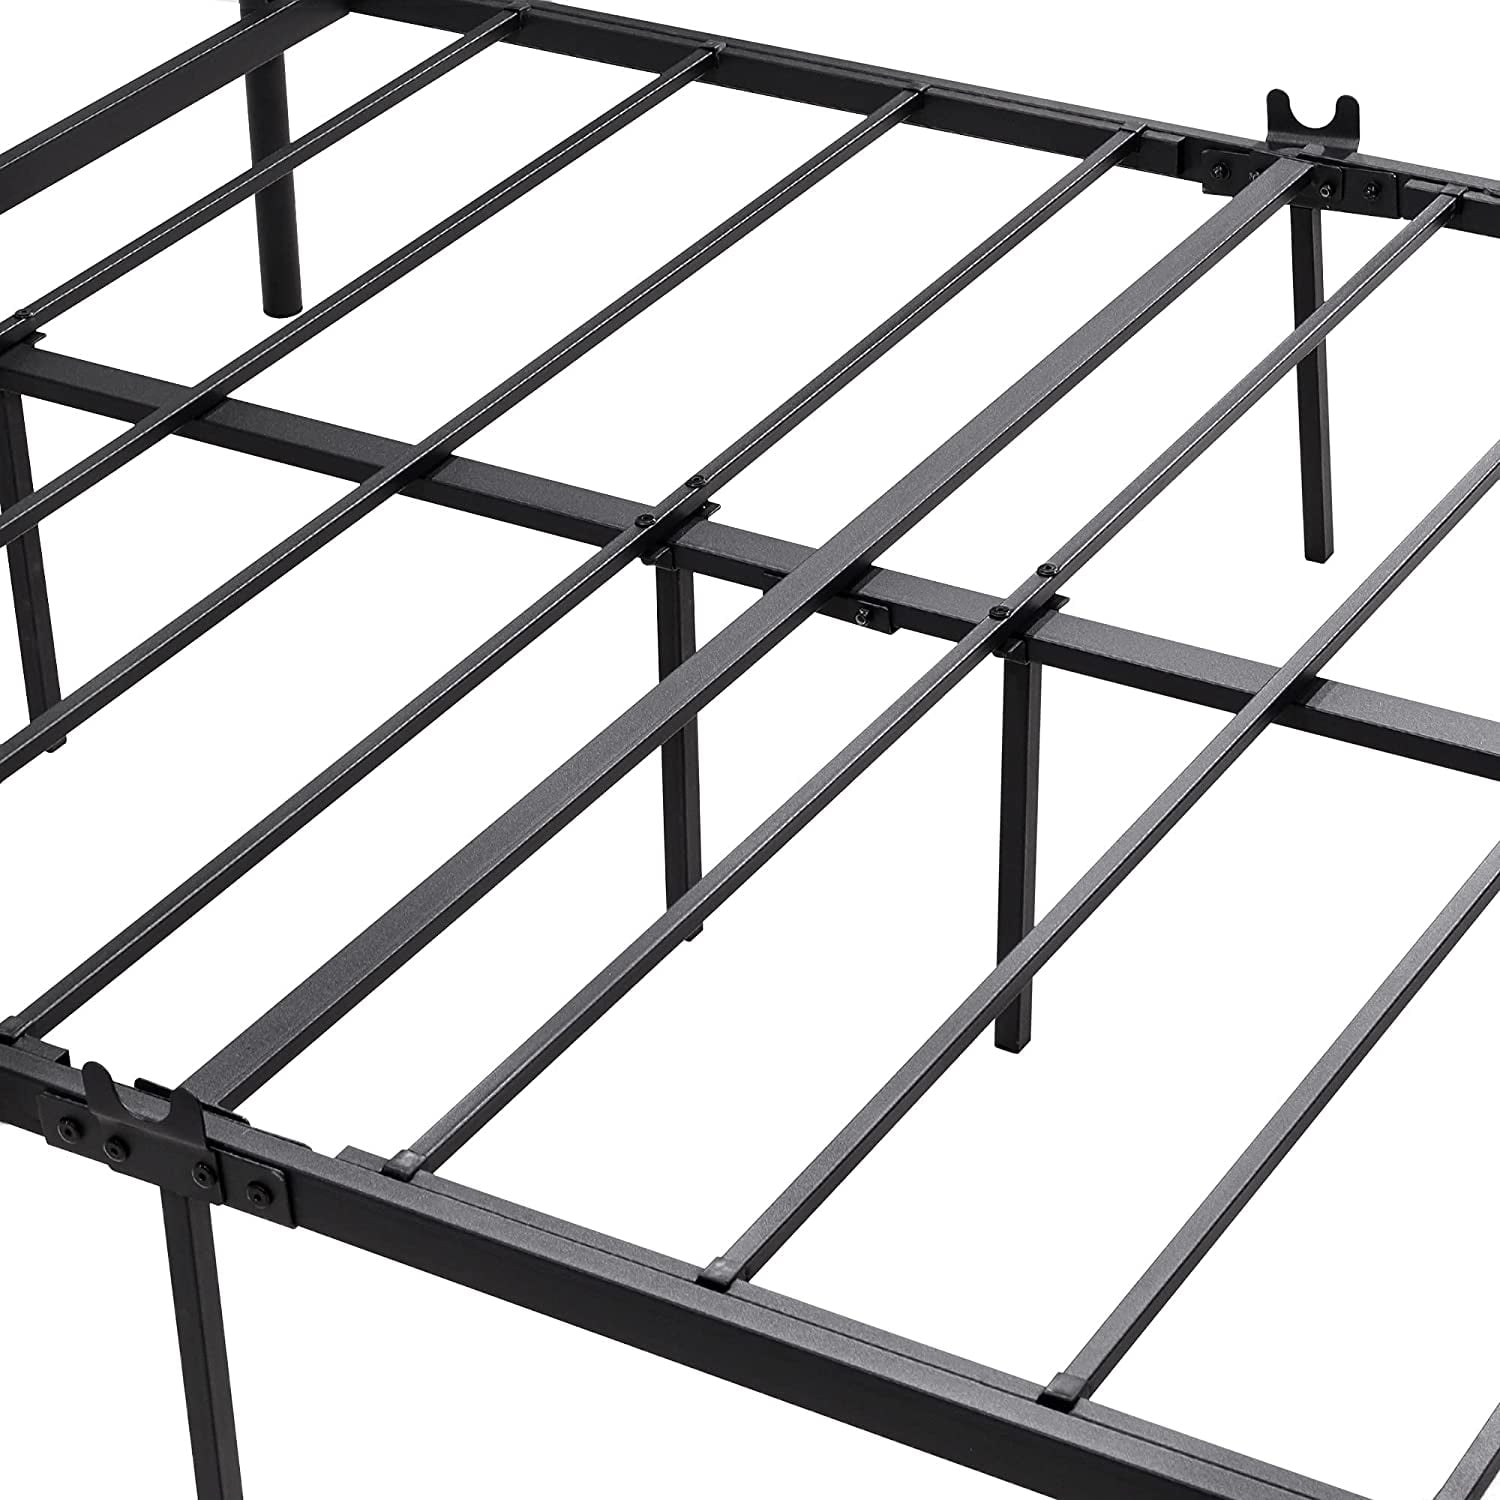 BOFENG Full Metal Bed Frame with Vintage Wood Headboard and 